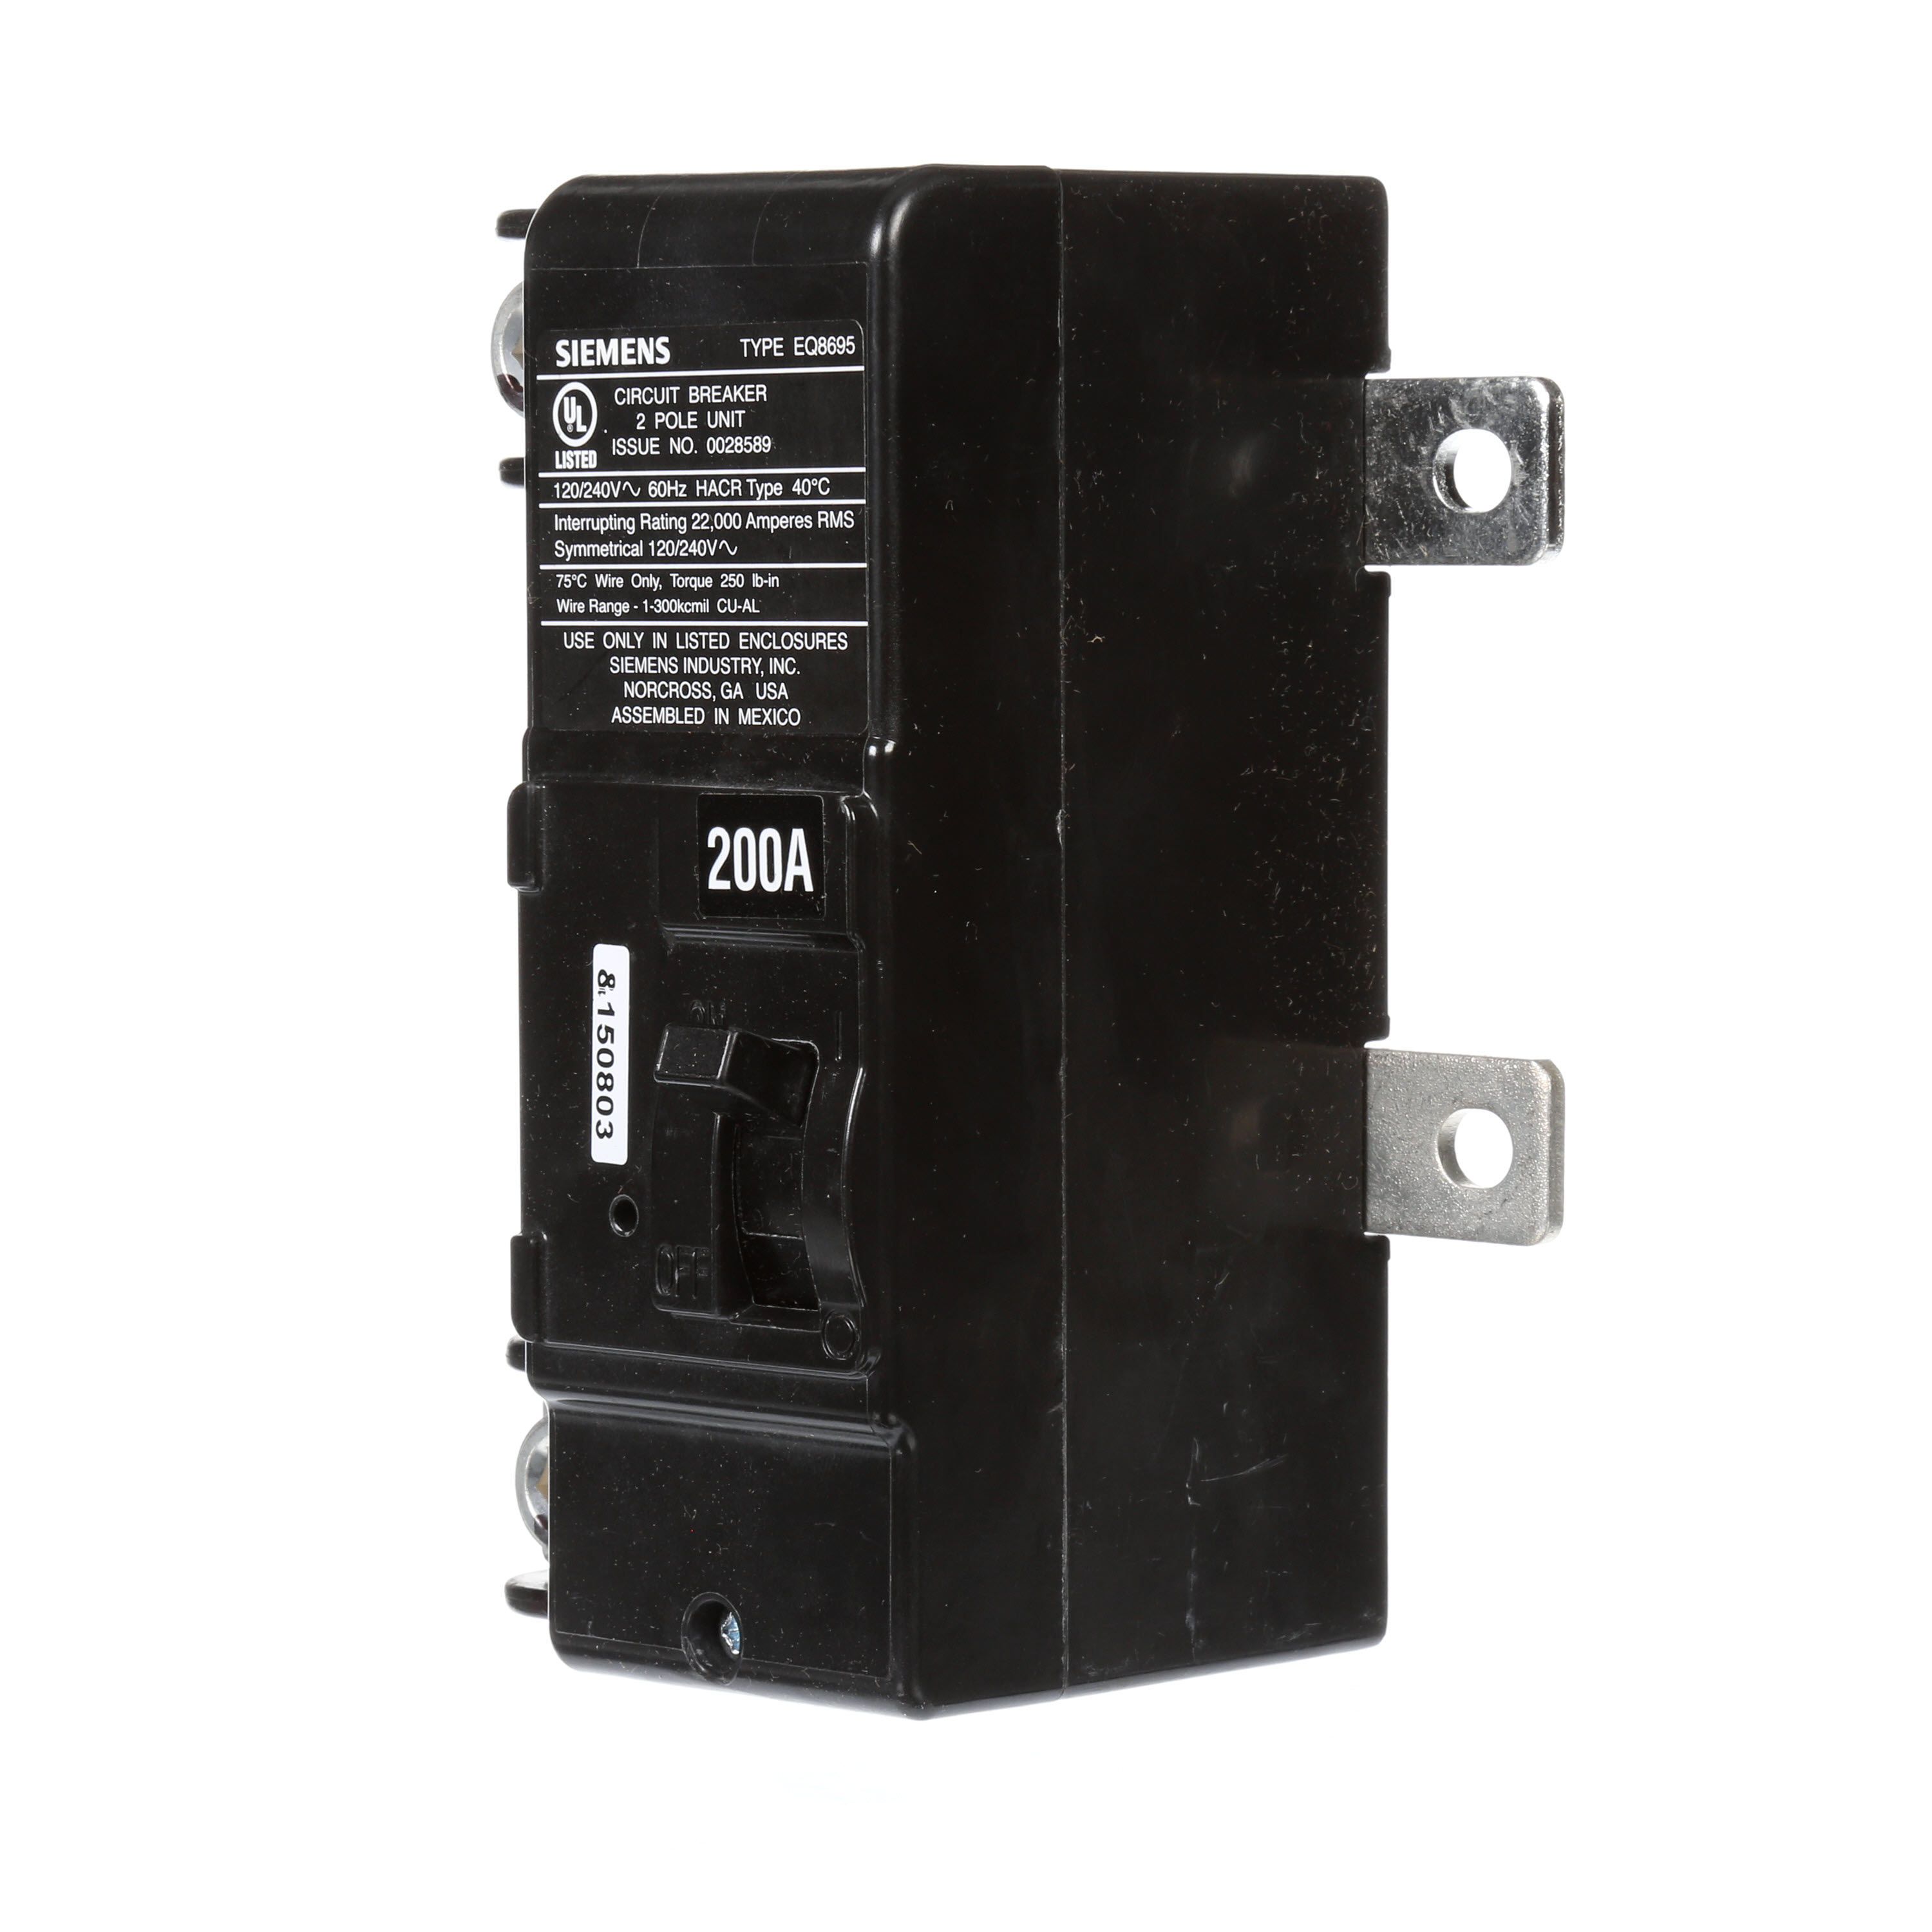 Siemens Low Voltage Residential Circuit Breakers Main Breakers - Family G Mainsare Circuit Protection Load Center Mains, Feeders, and Miniature Circuit Breakers. Load center conversion kit 1-Phase main breaker.. Rated (200 - 225A) AIR 22 KA.